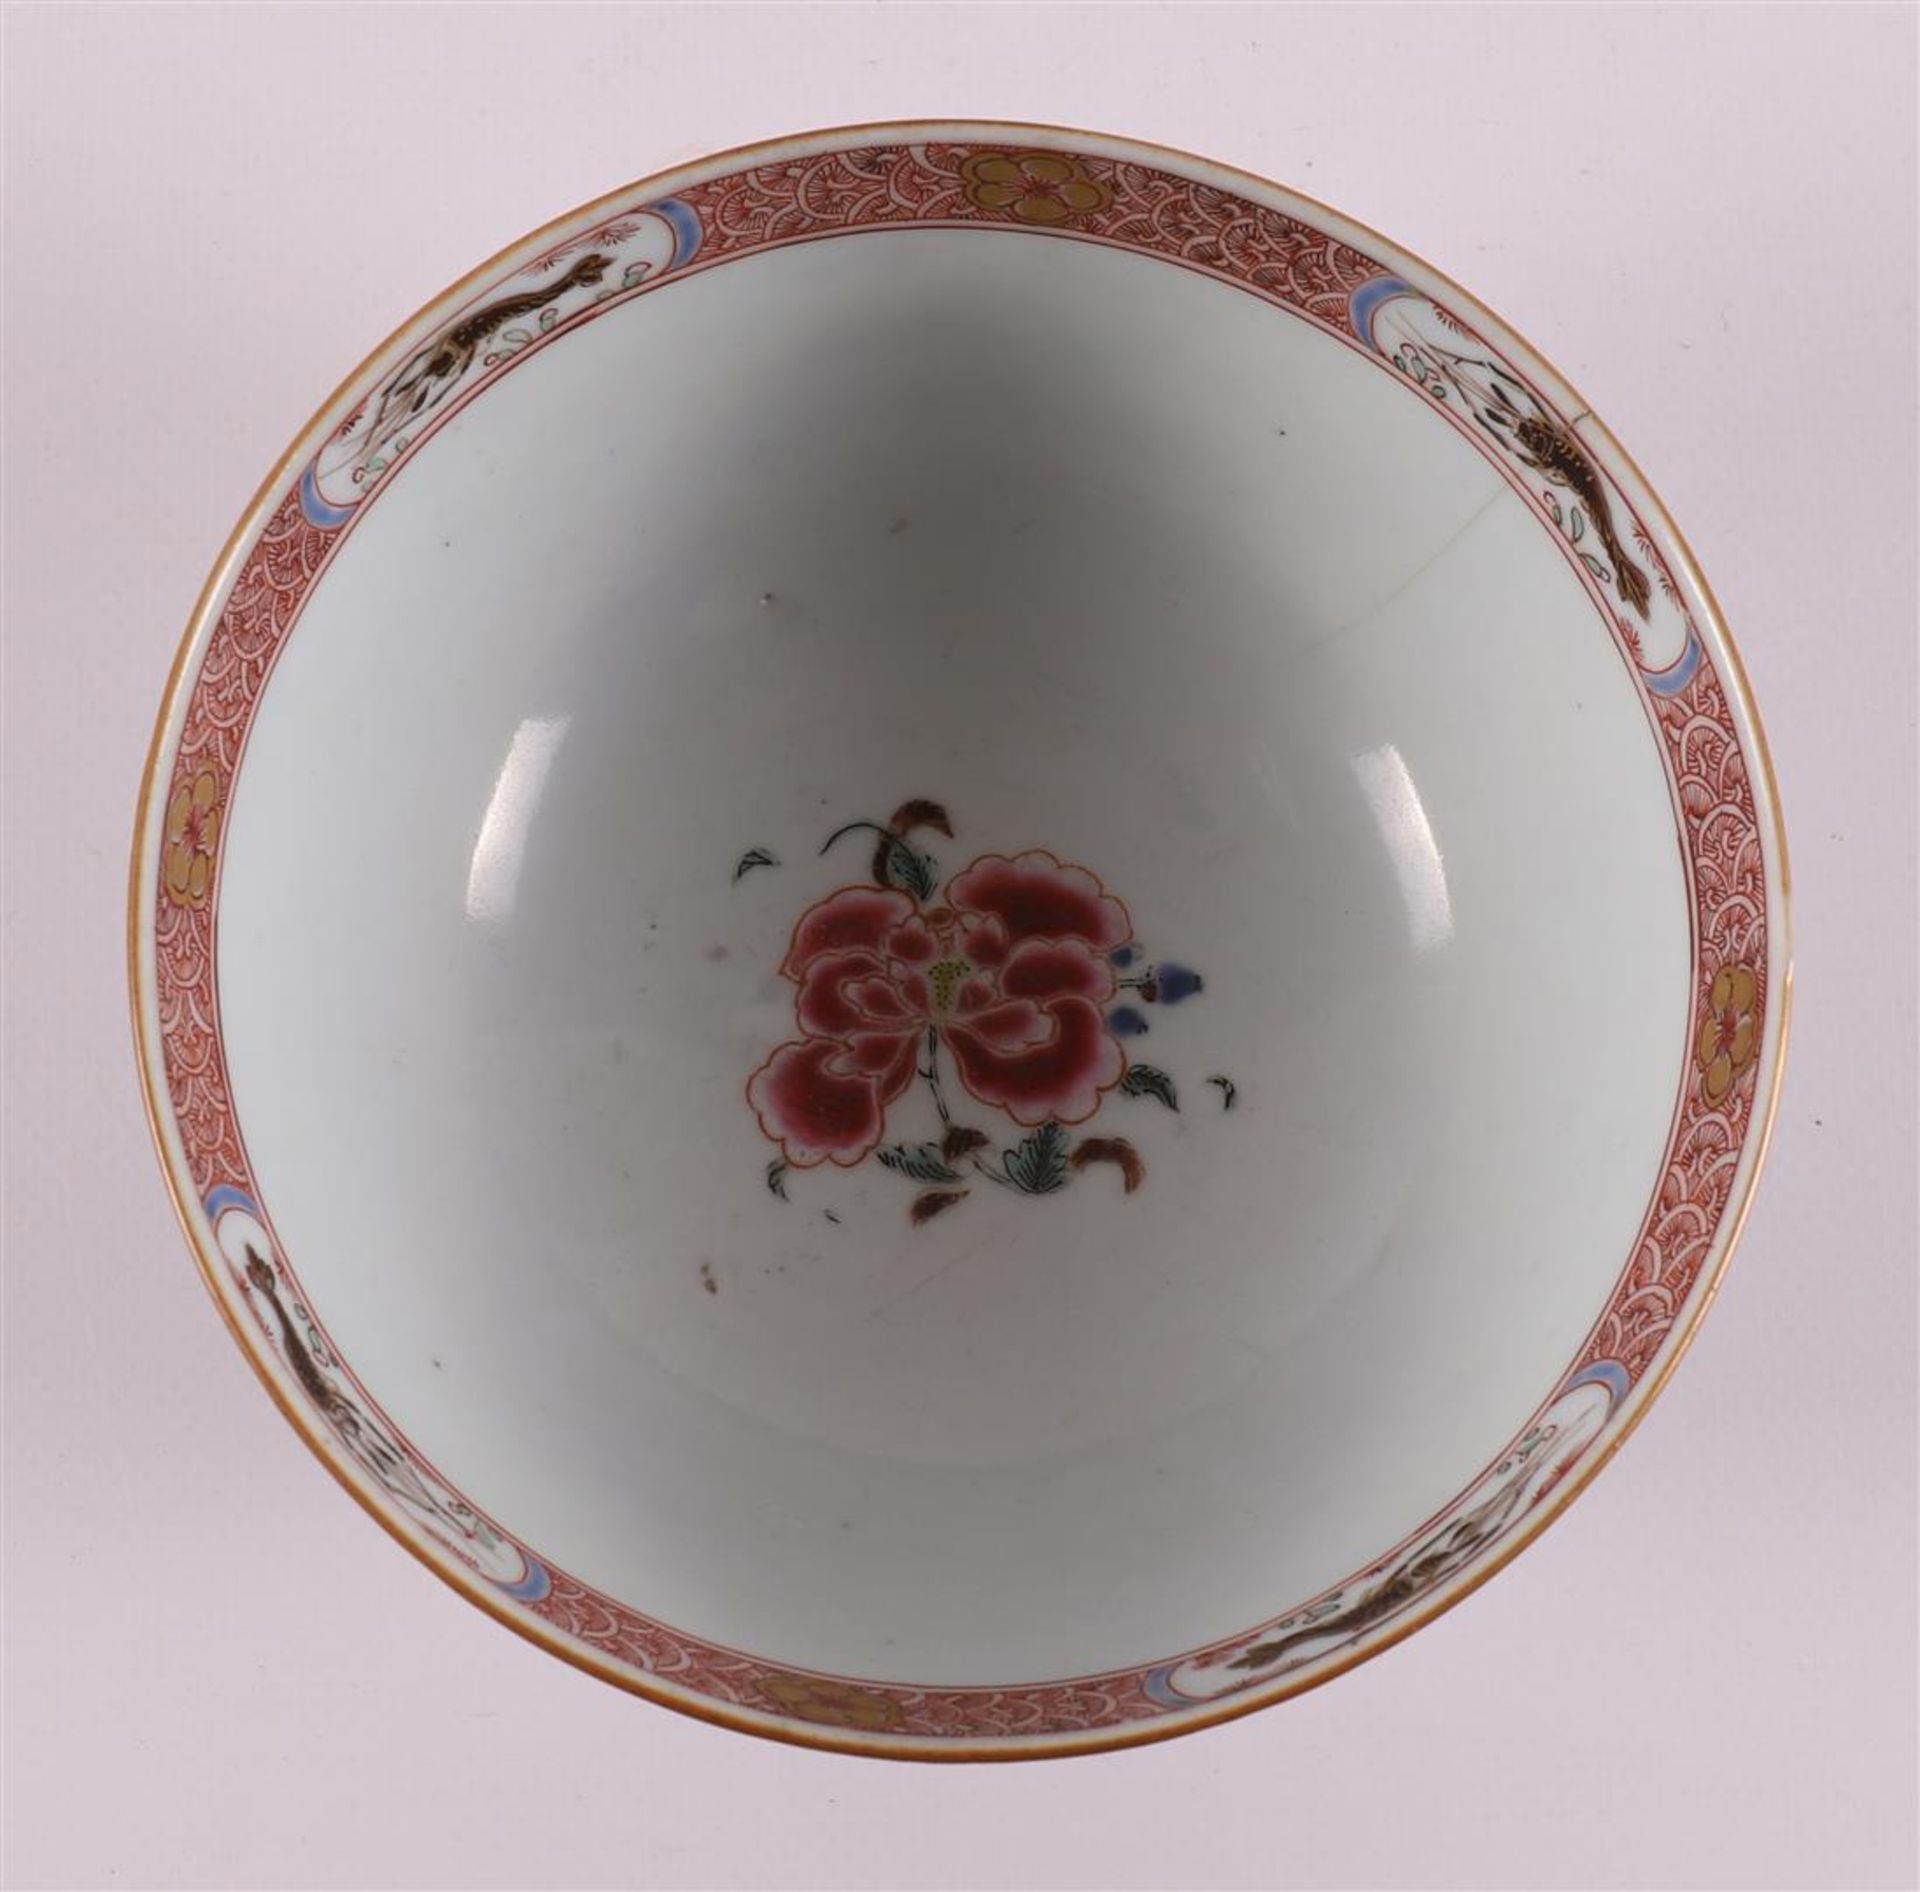 Three famille rose porcelain bowls on stand ring, China, Qianlong, 18th century. - Image 11 of 13